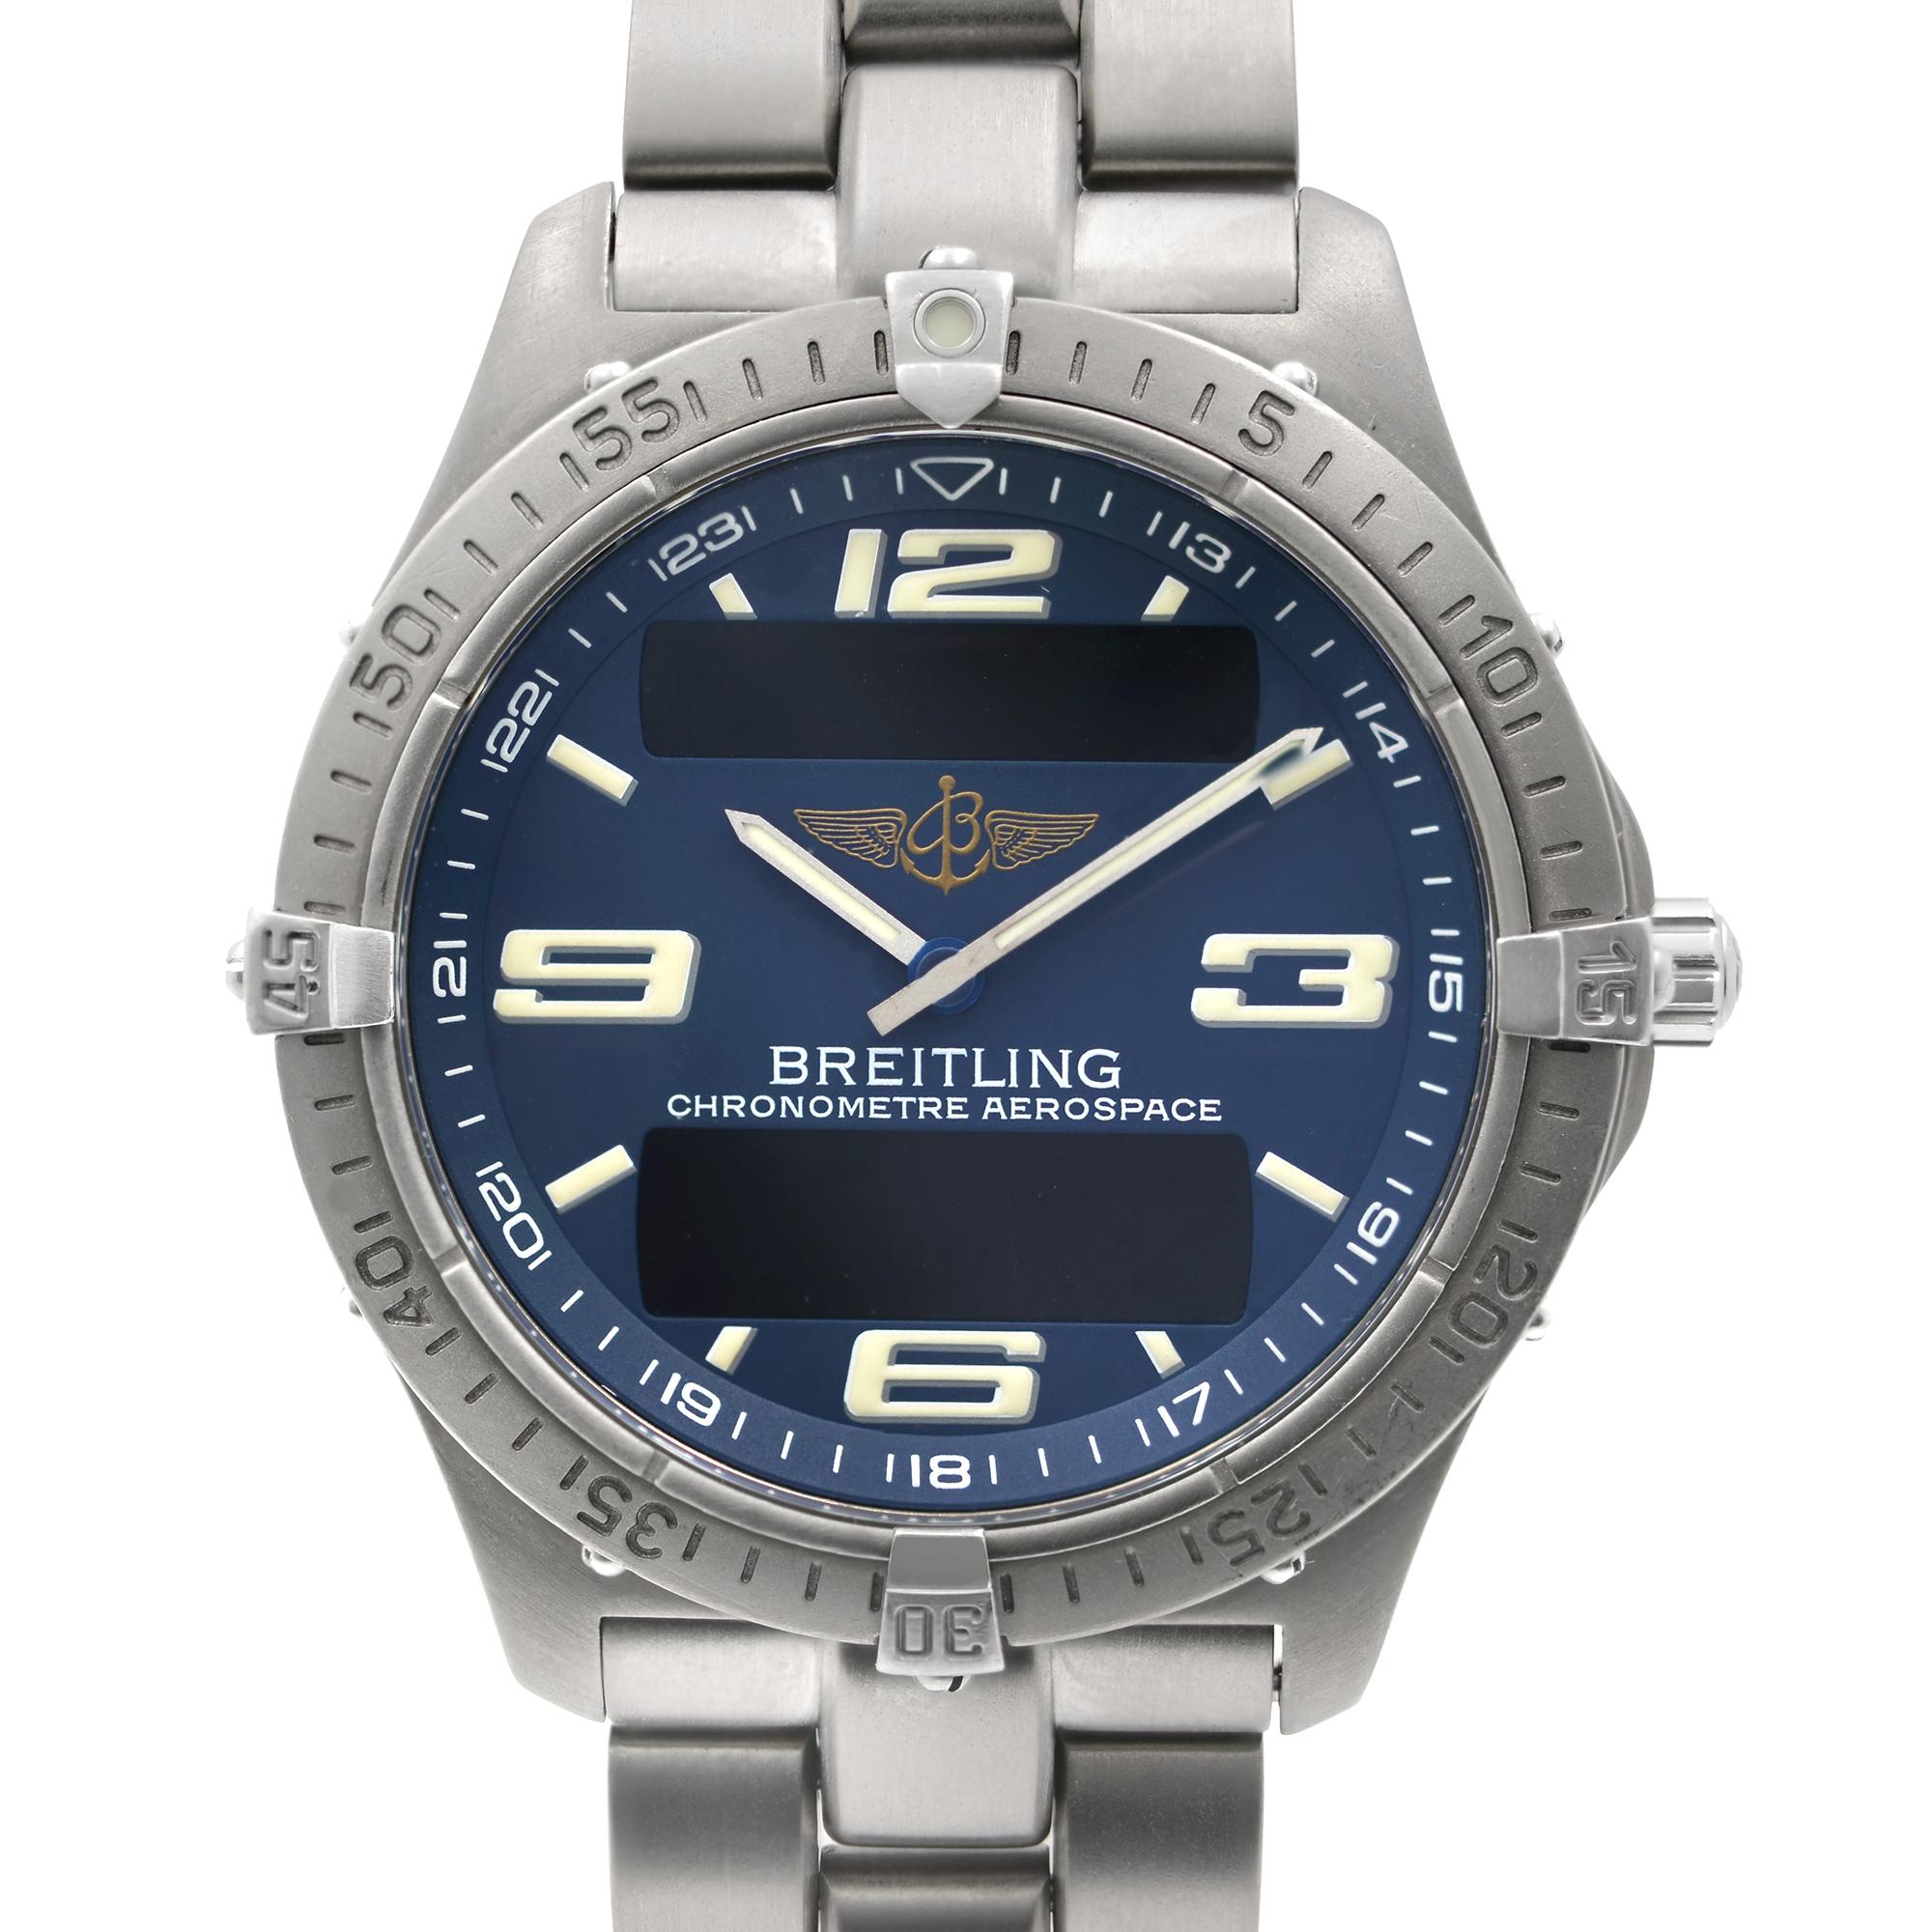 Pre-owned Breitling Aerospace Titanium Blue Dial Quartz Men's Watch. The Watch Bezel Shows Minor Dents and Scratches as Seen in the Pictures. No Original Box and Papers are Included. Comes with Chronostore Presentation Box and Authenticity Card.